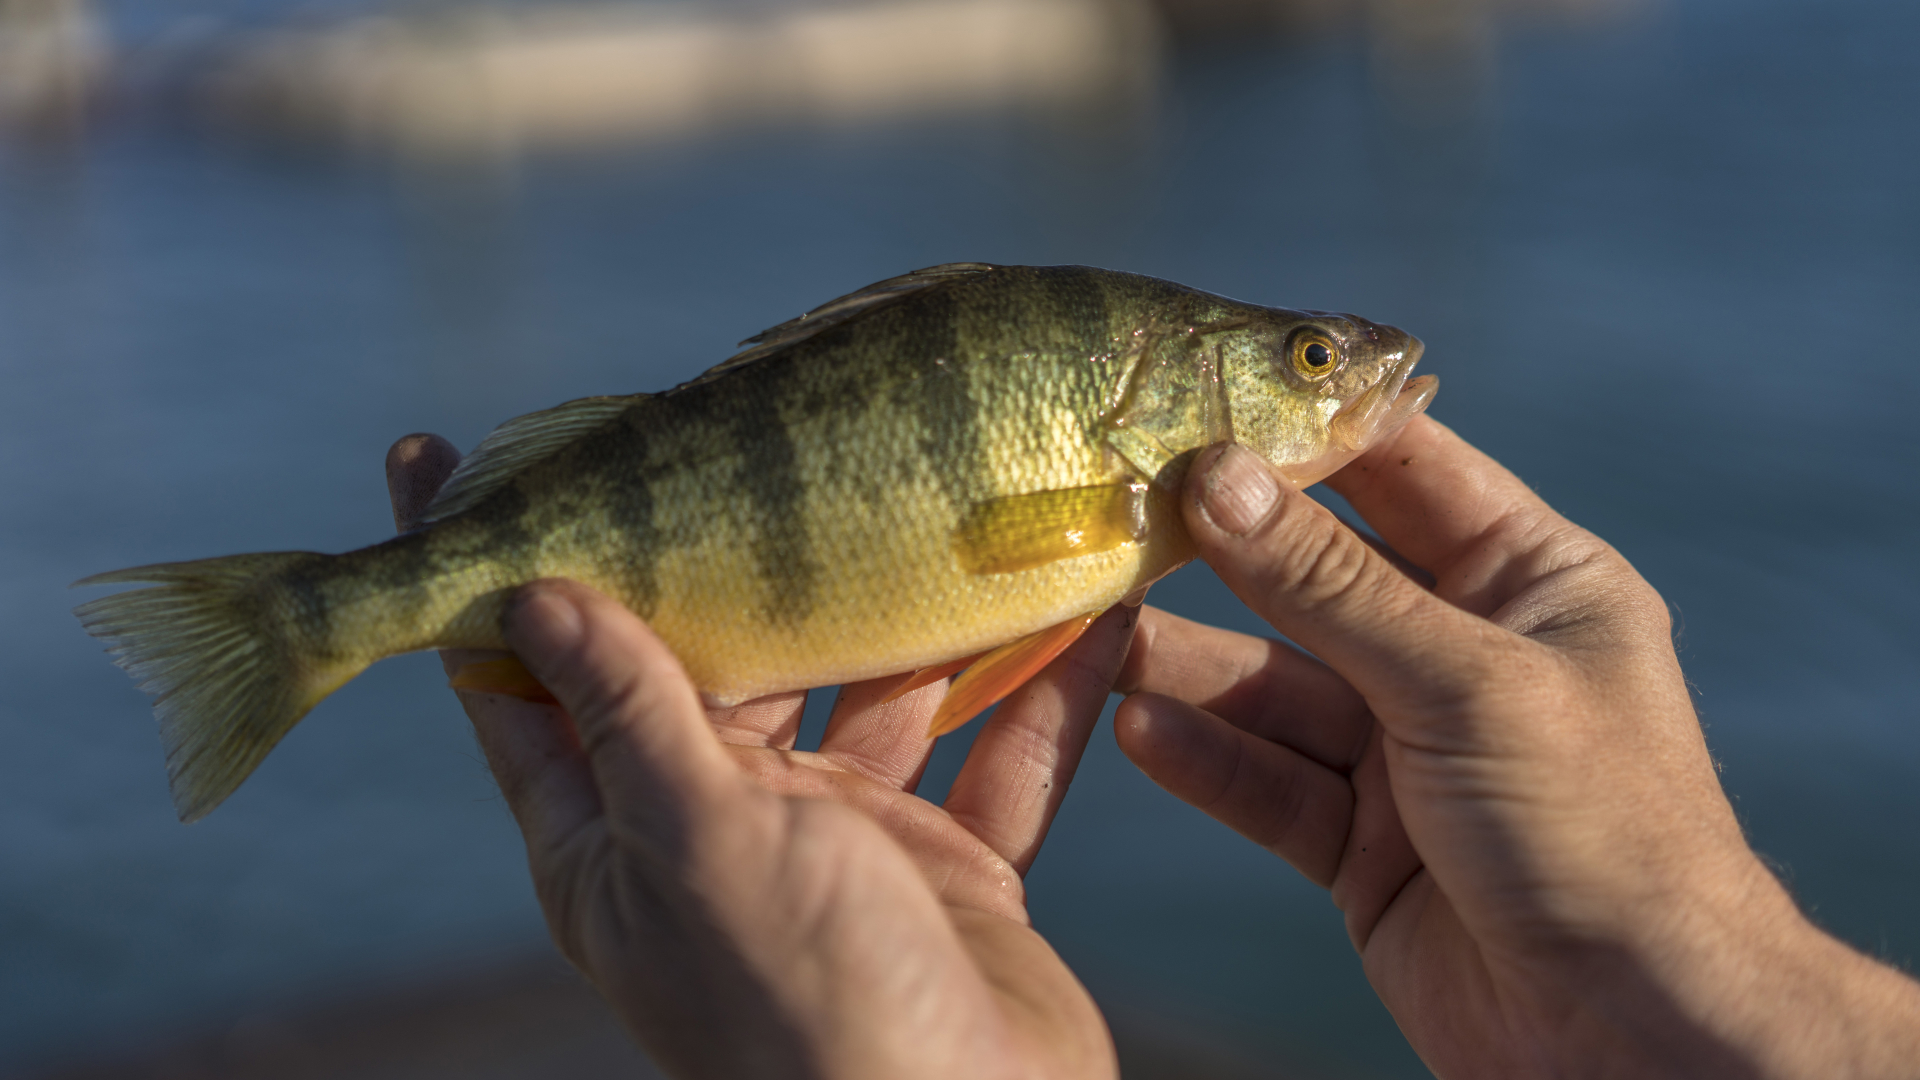 Colorful Perch Baits for an Exciting Fishing Adventure